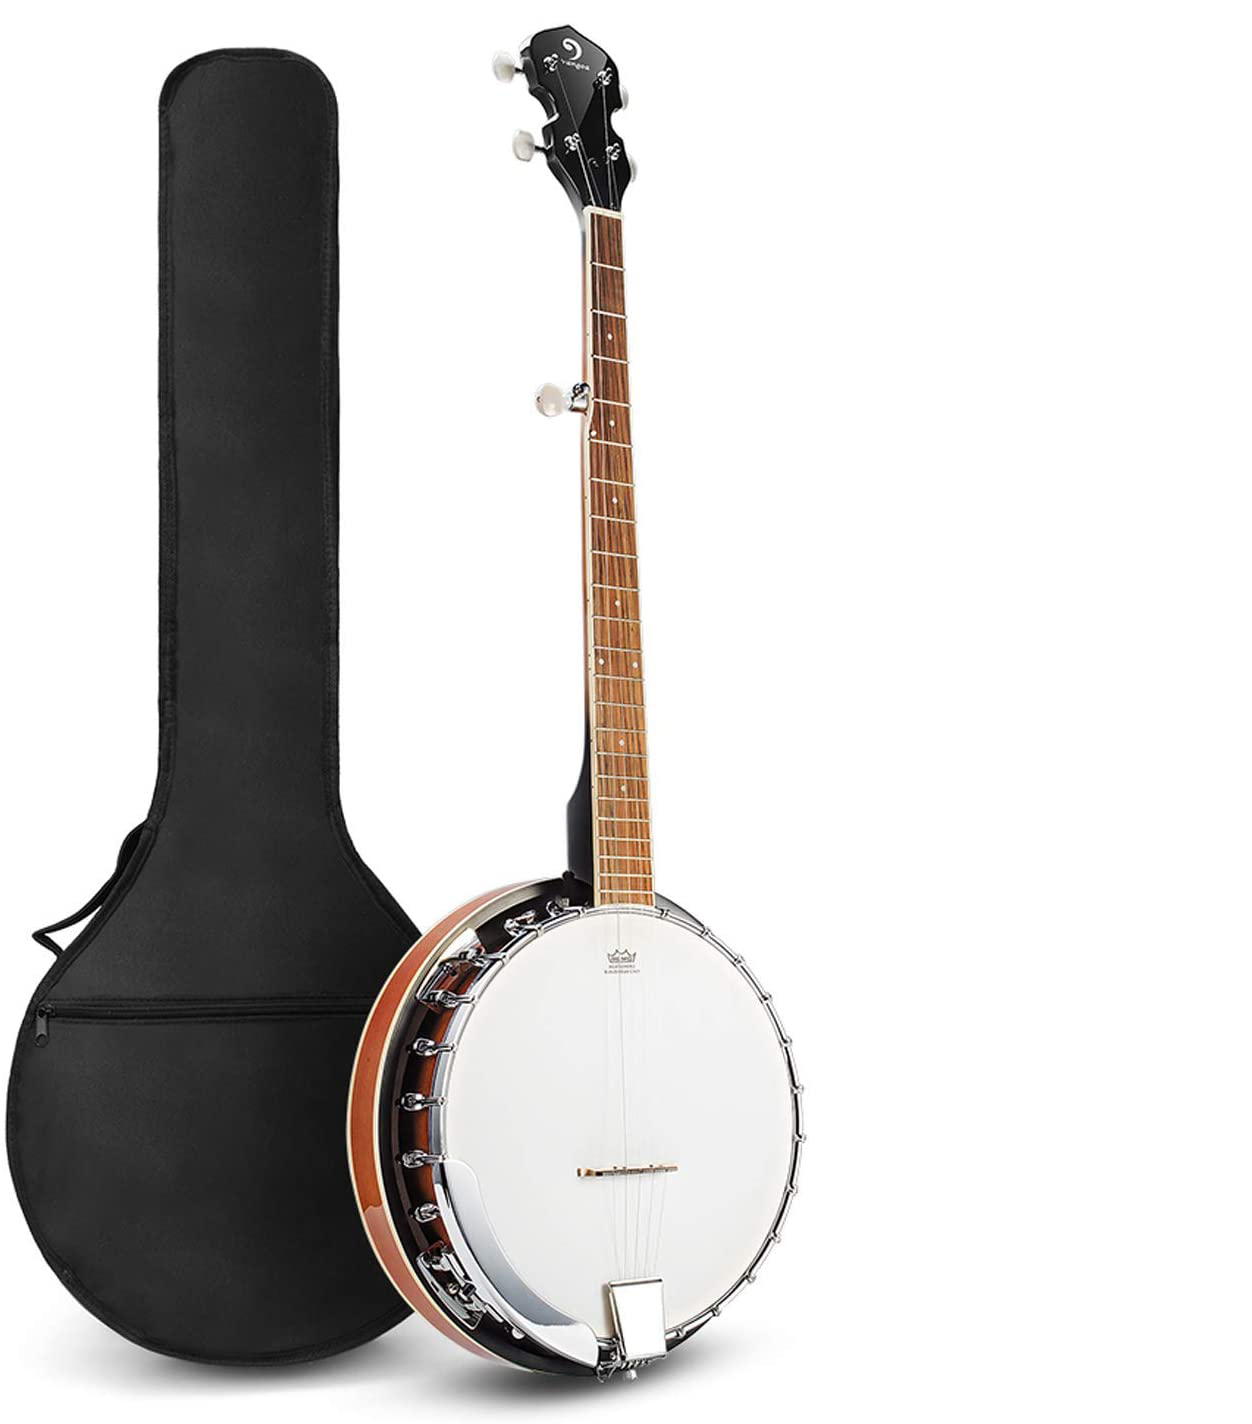 Vangoa 5 String Banjo Guitar With Remo Head Closed & Solid Back